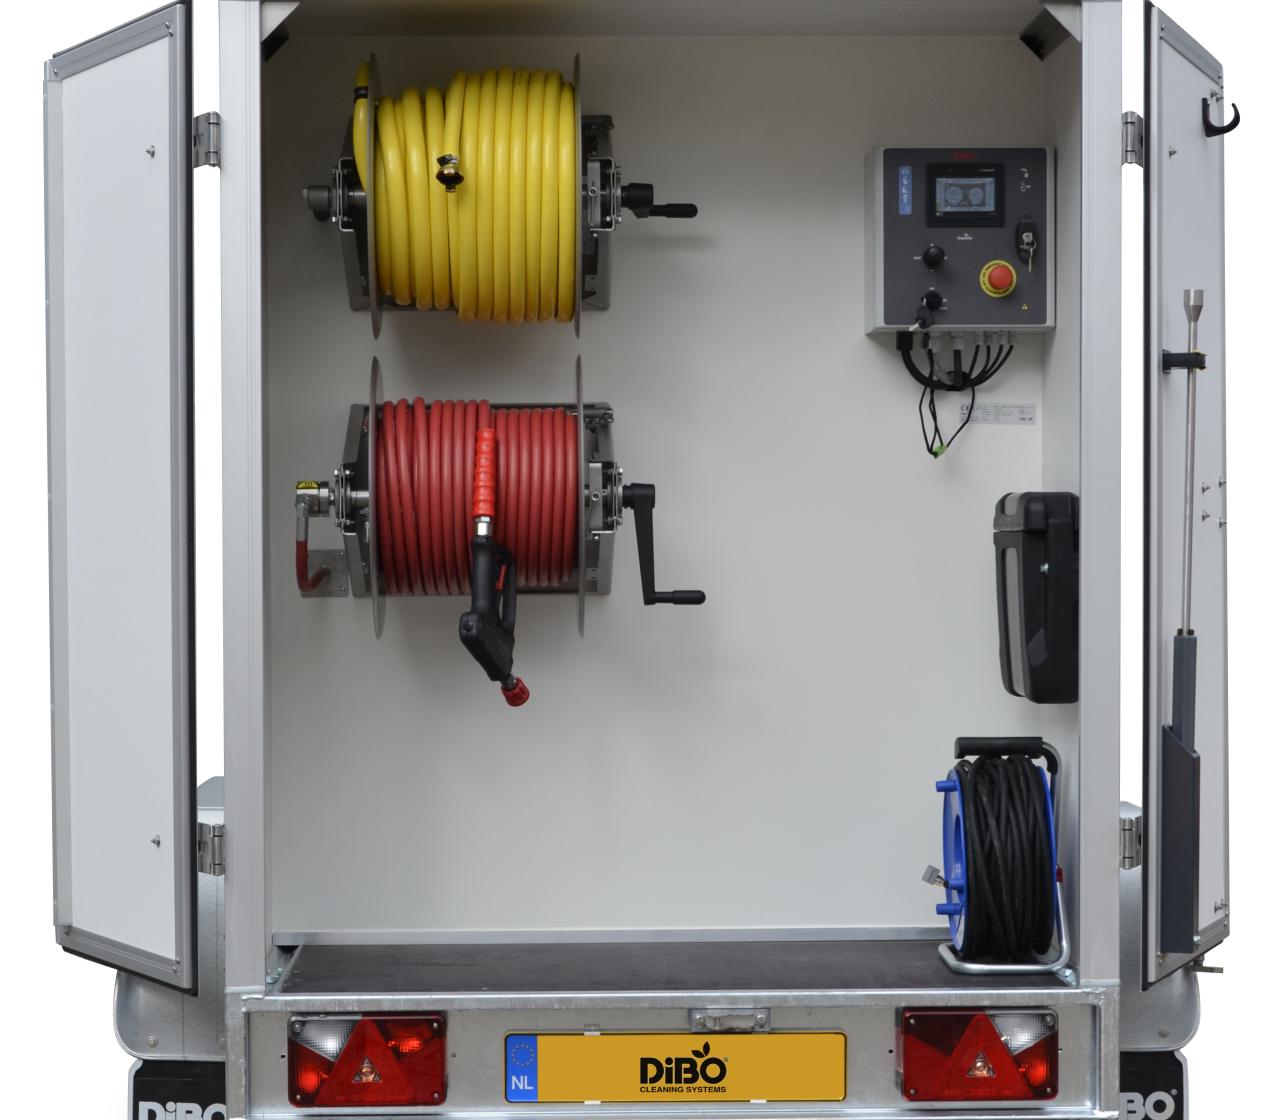 DiBO JMB-C+ rear view with low and high pressure hose reels and the digital controls